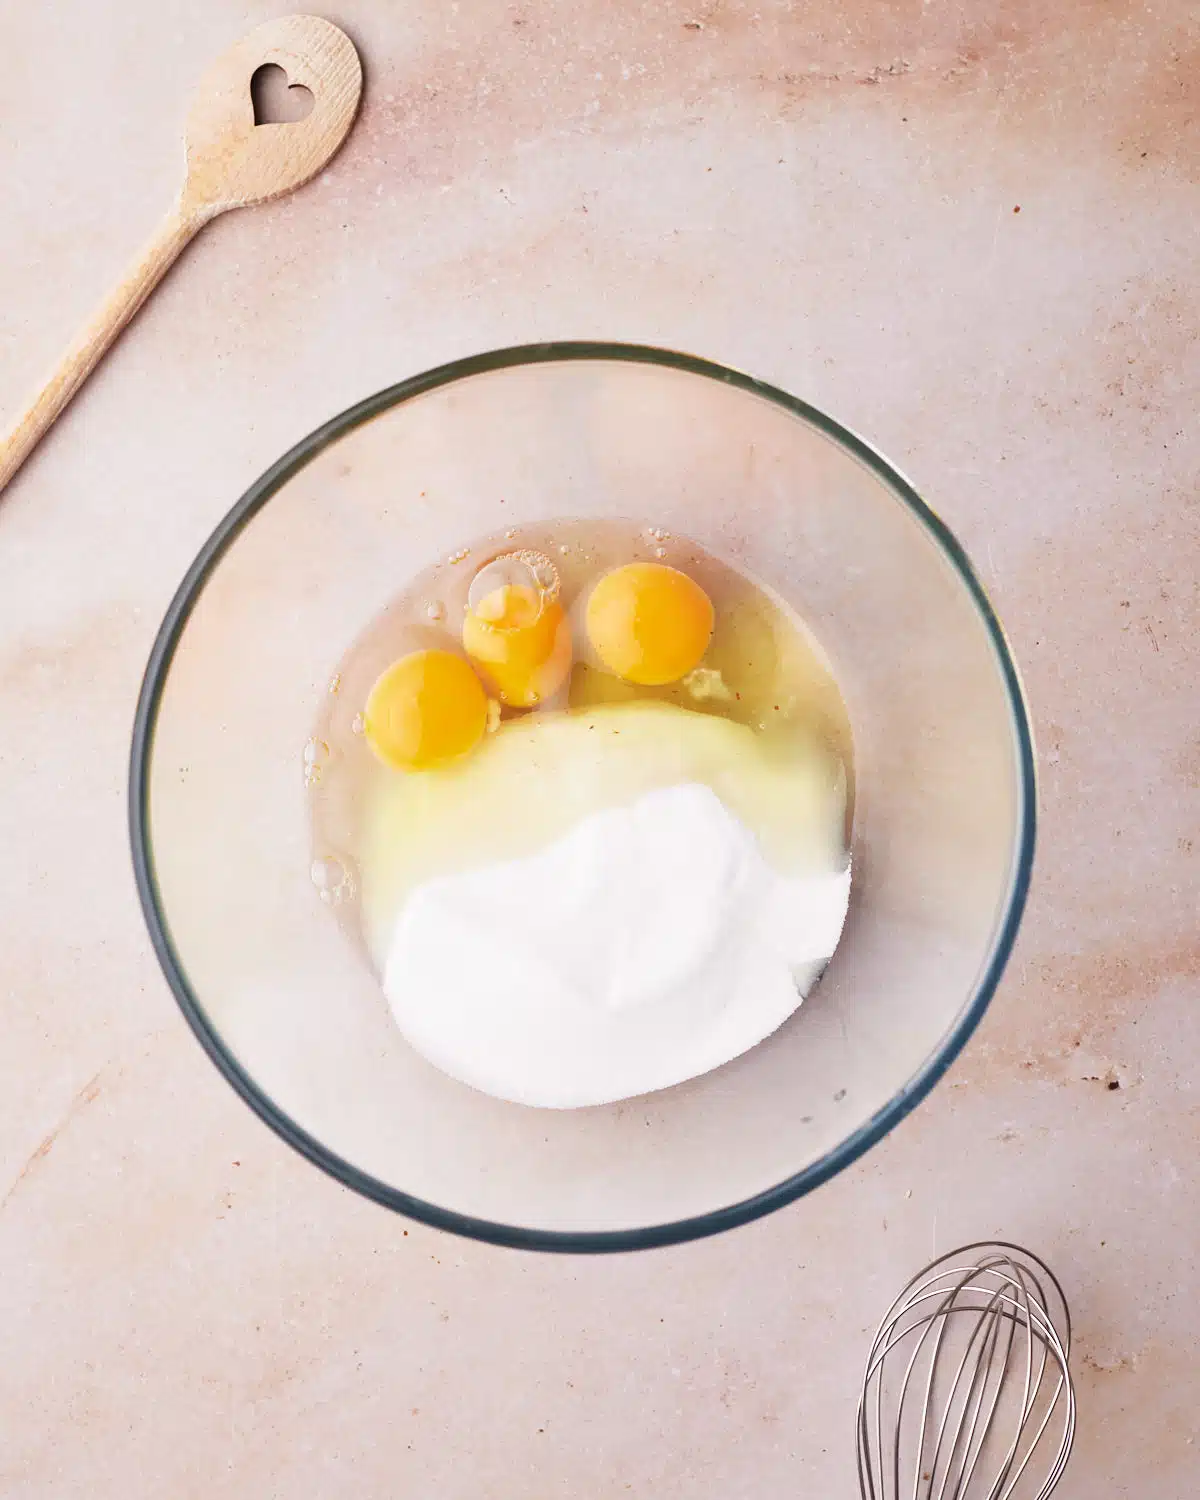 Eggs and sugar in a glass mixing bowl.